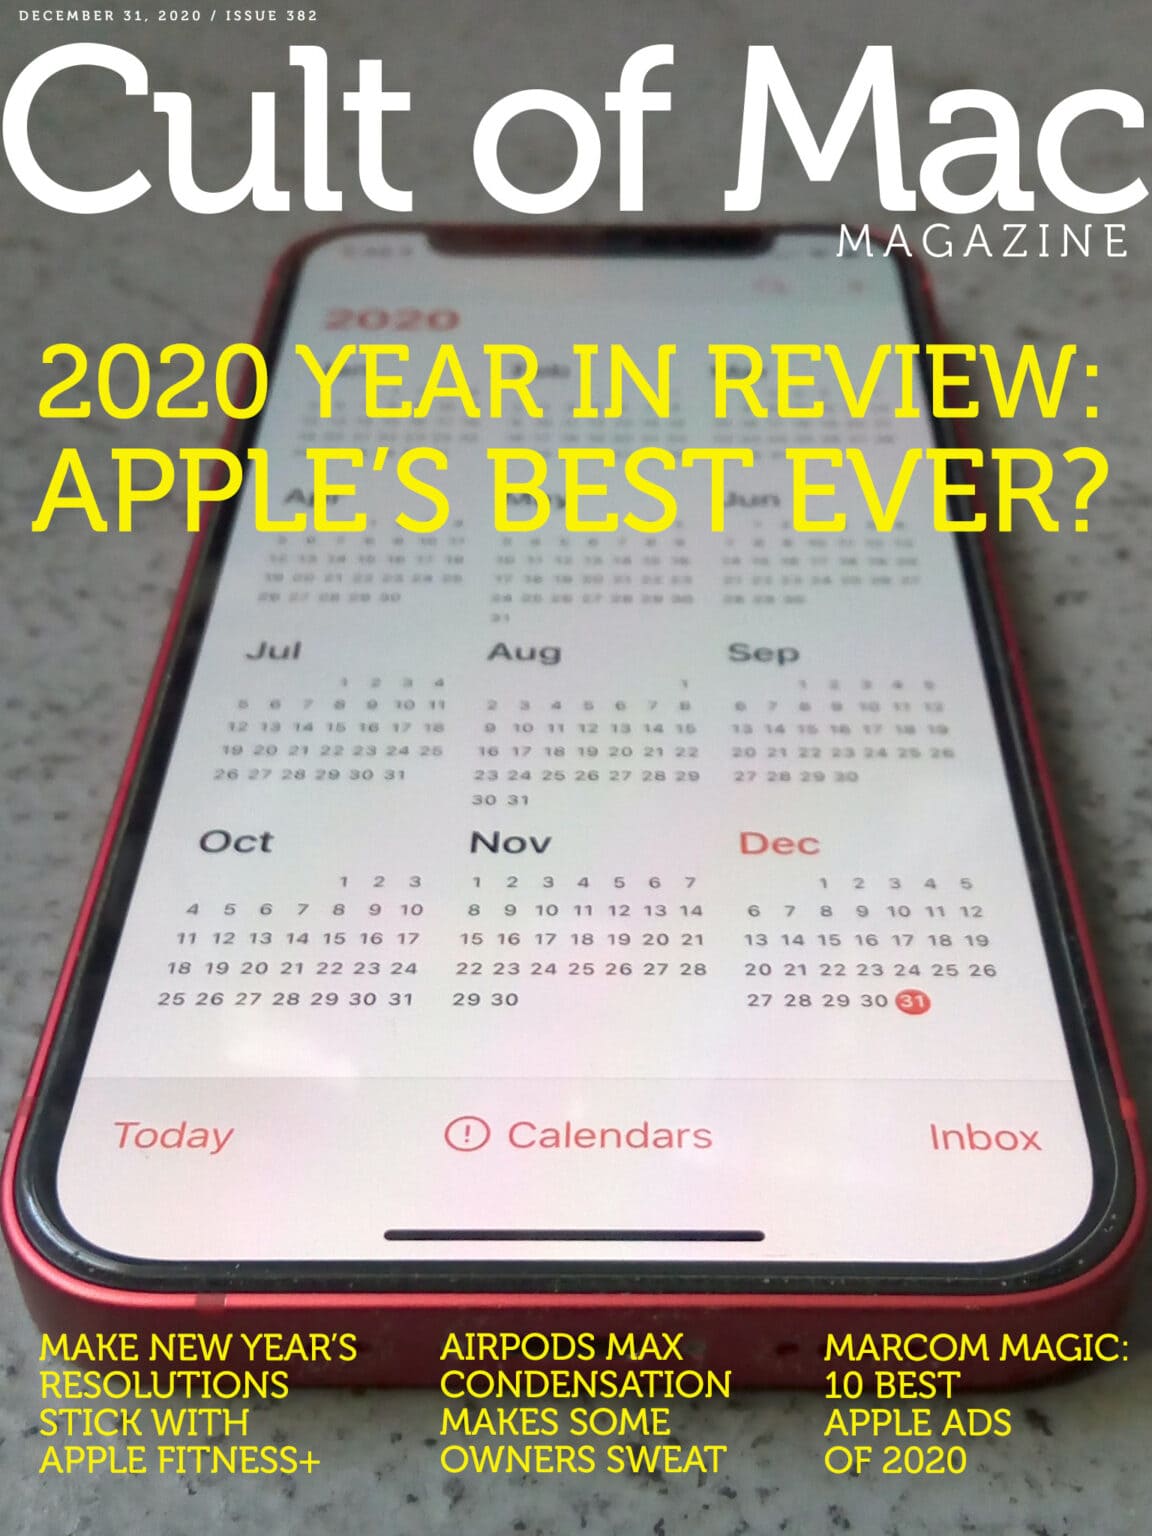 Can Apple pull off an even more amazing year in 2021?